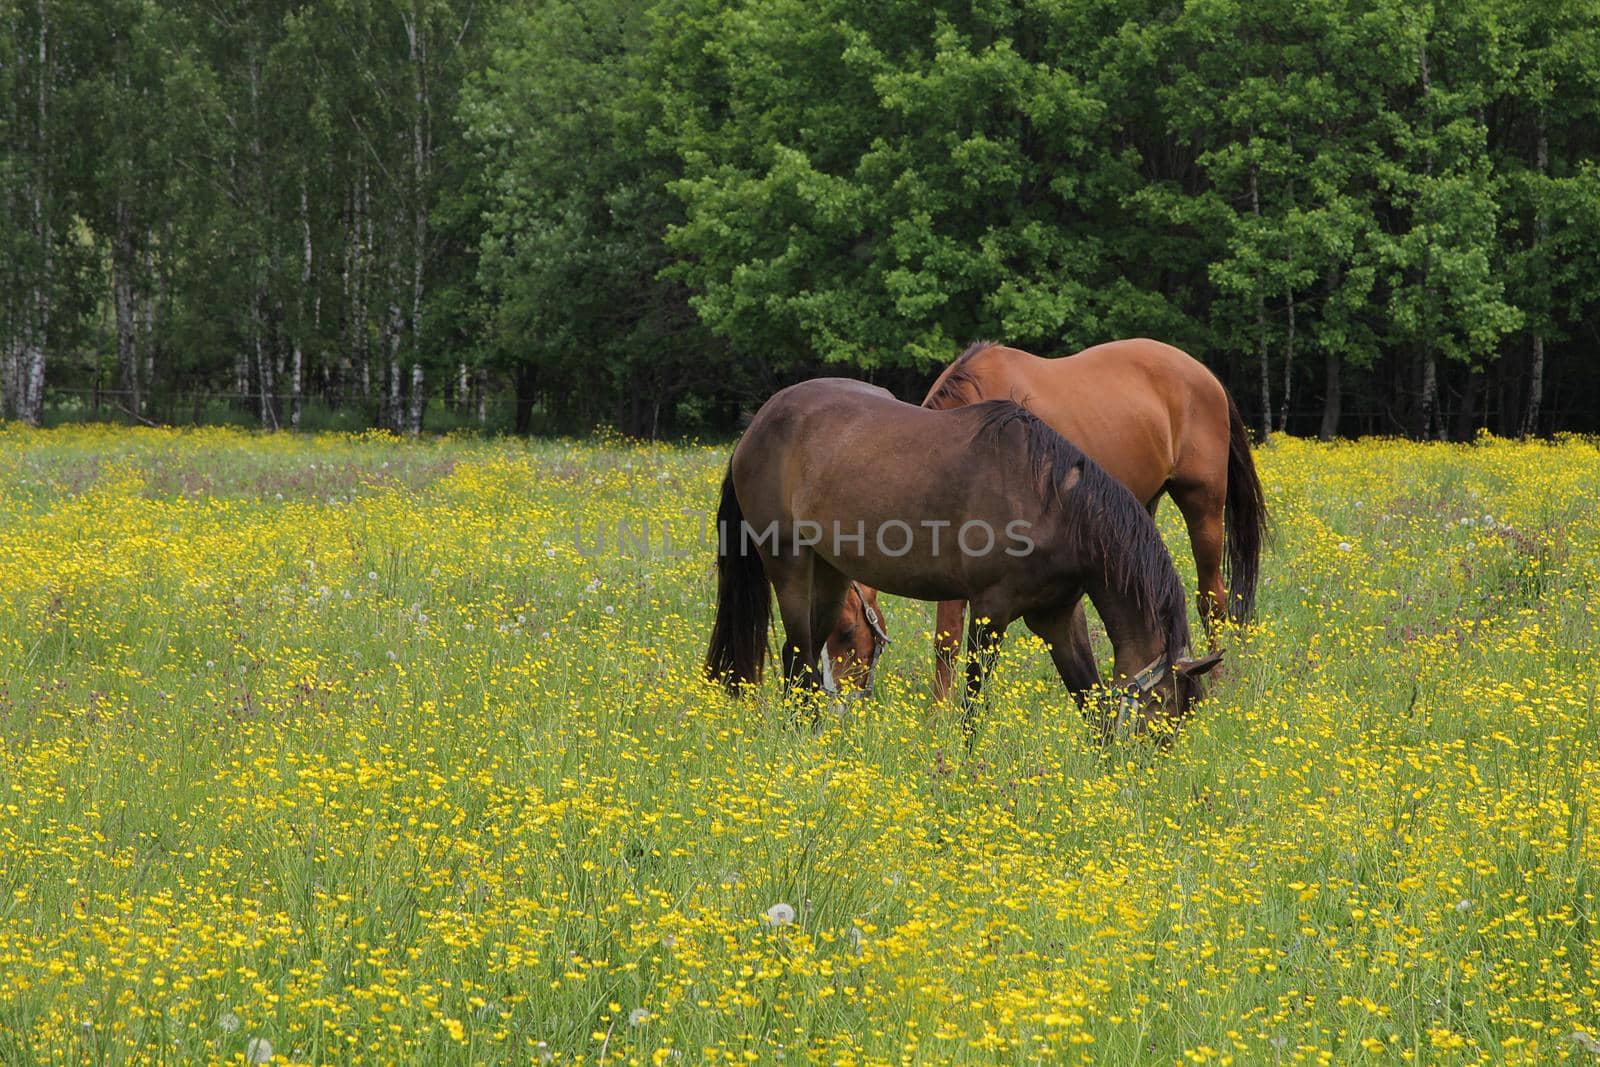 Horses graze in the meadow near the forest. by Yurich32